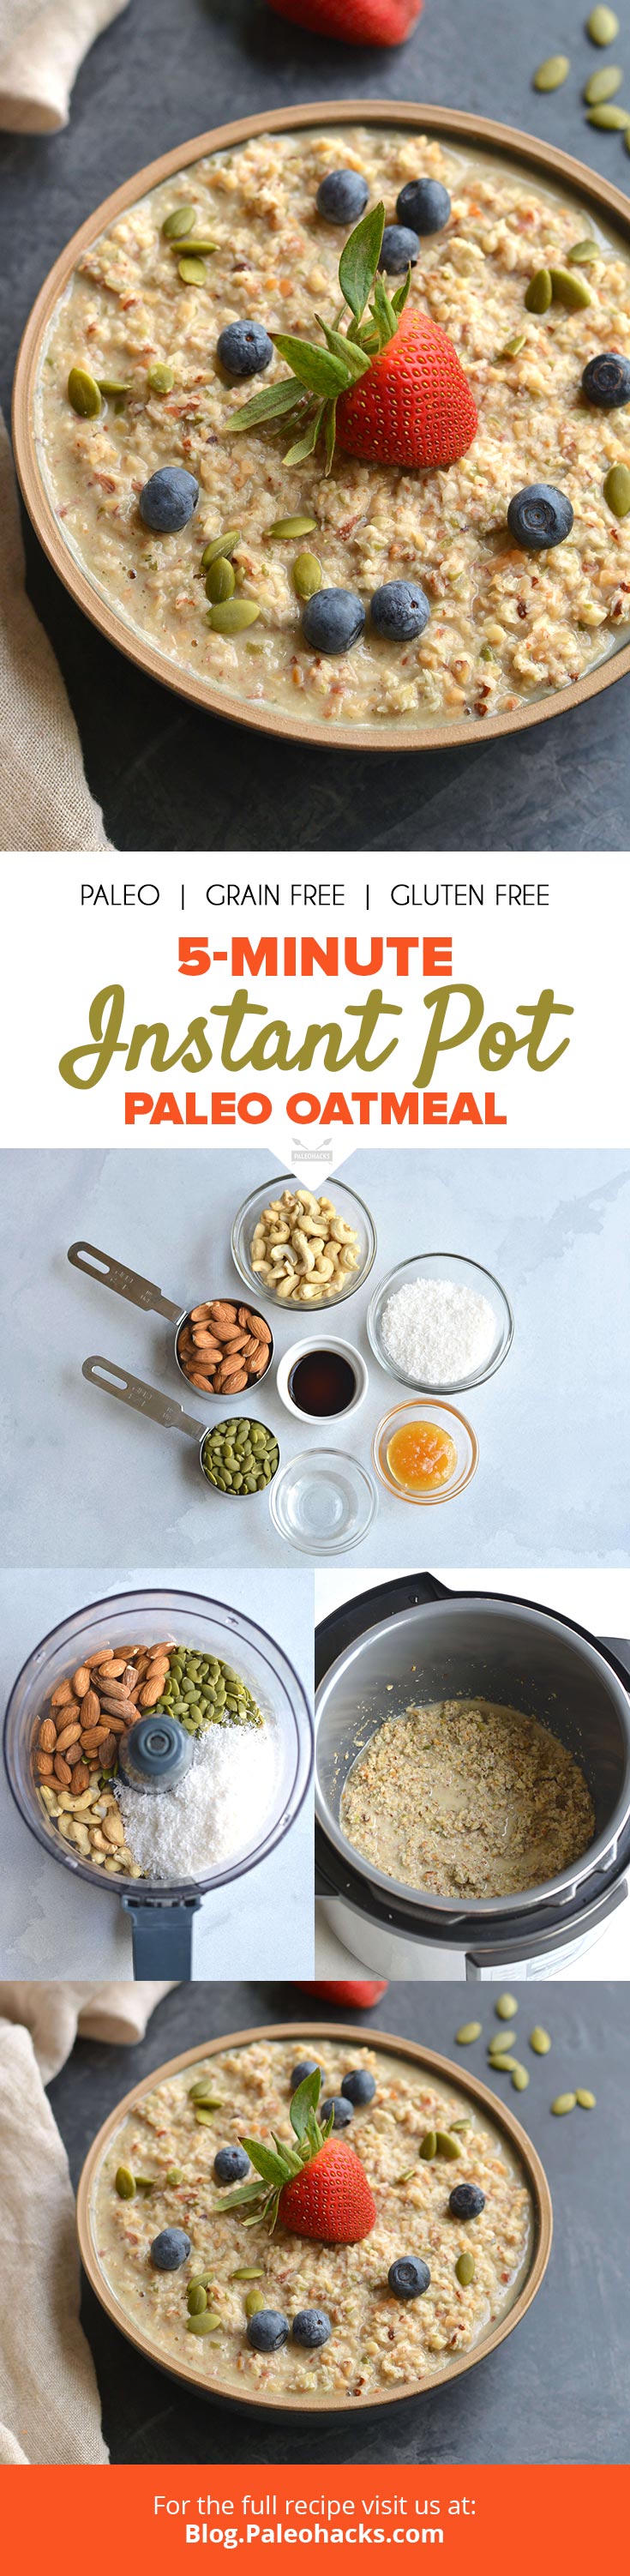 Whip up this 5-Minute Paleo “Oatmeal” in your Instant Pot for a thick, creamy, and grain-free breakfast.